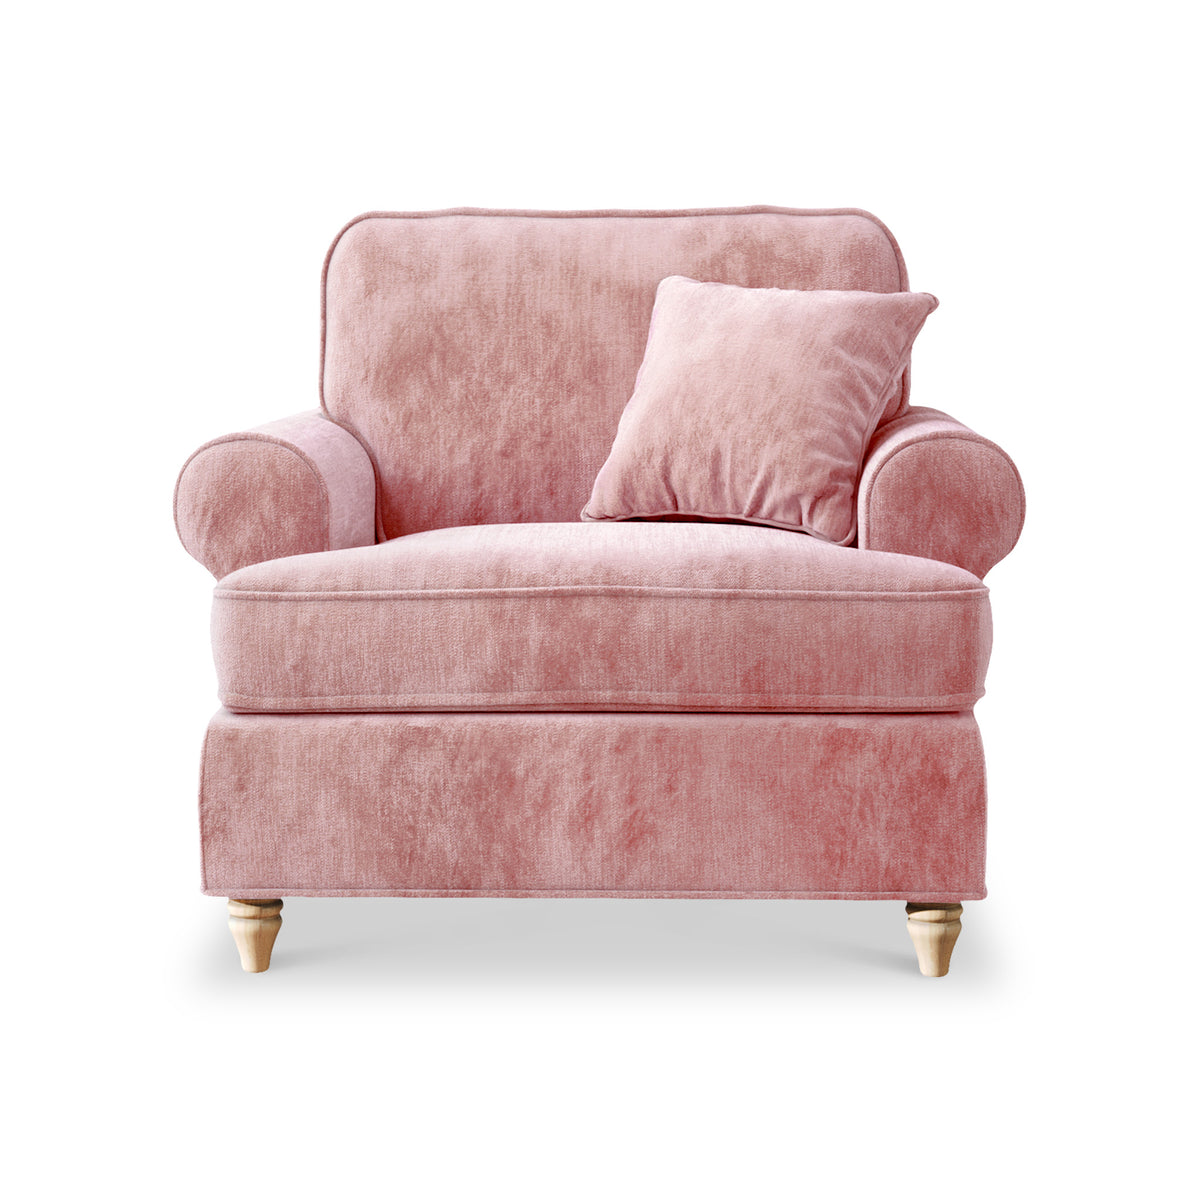 Alfie Armchair in Blush Pink  by Roseland Furniture